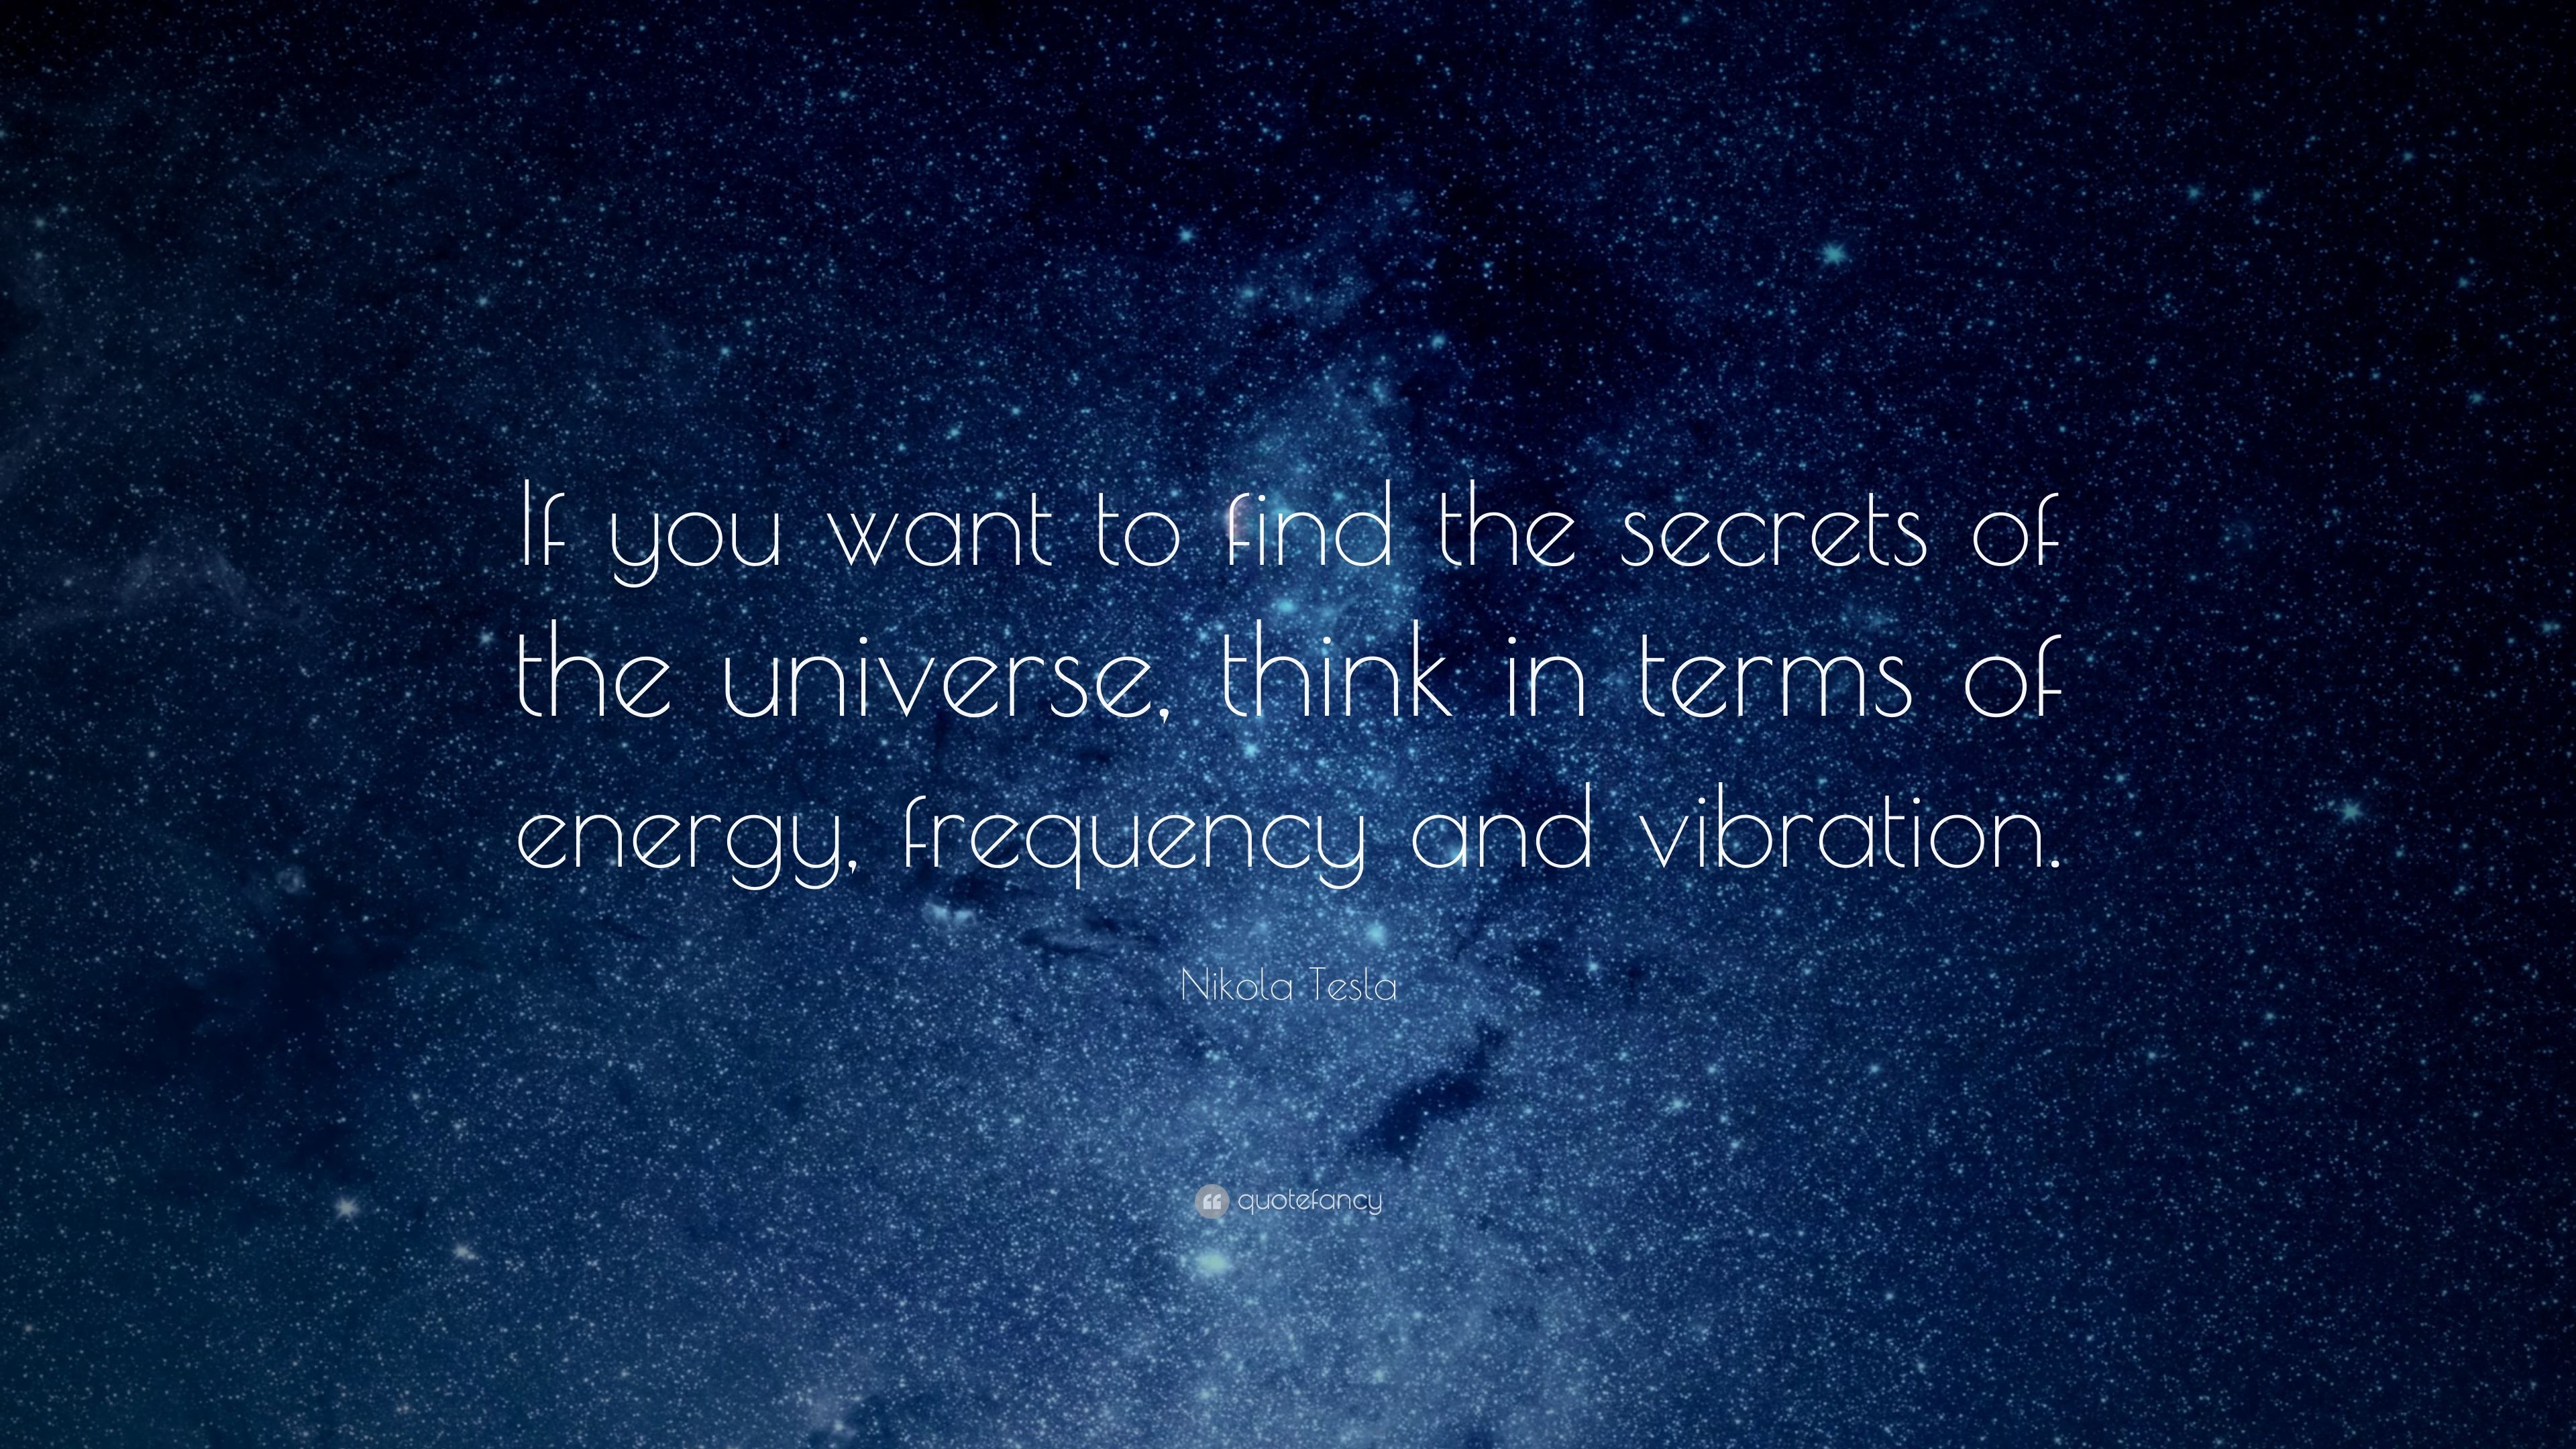 Nikola Tesla Quote: “If you want to find the secrets of the ...